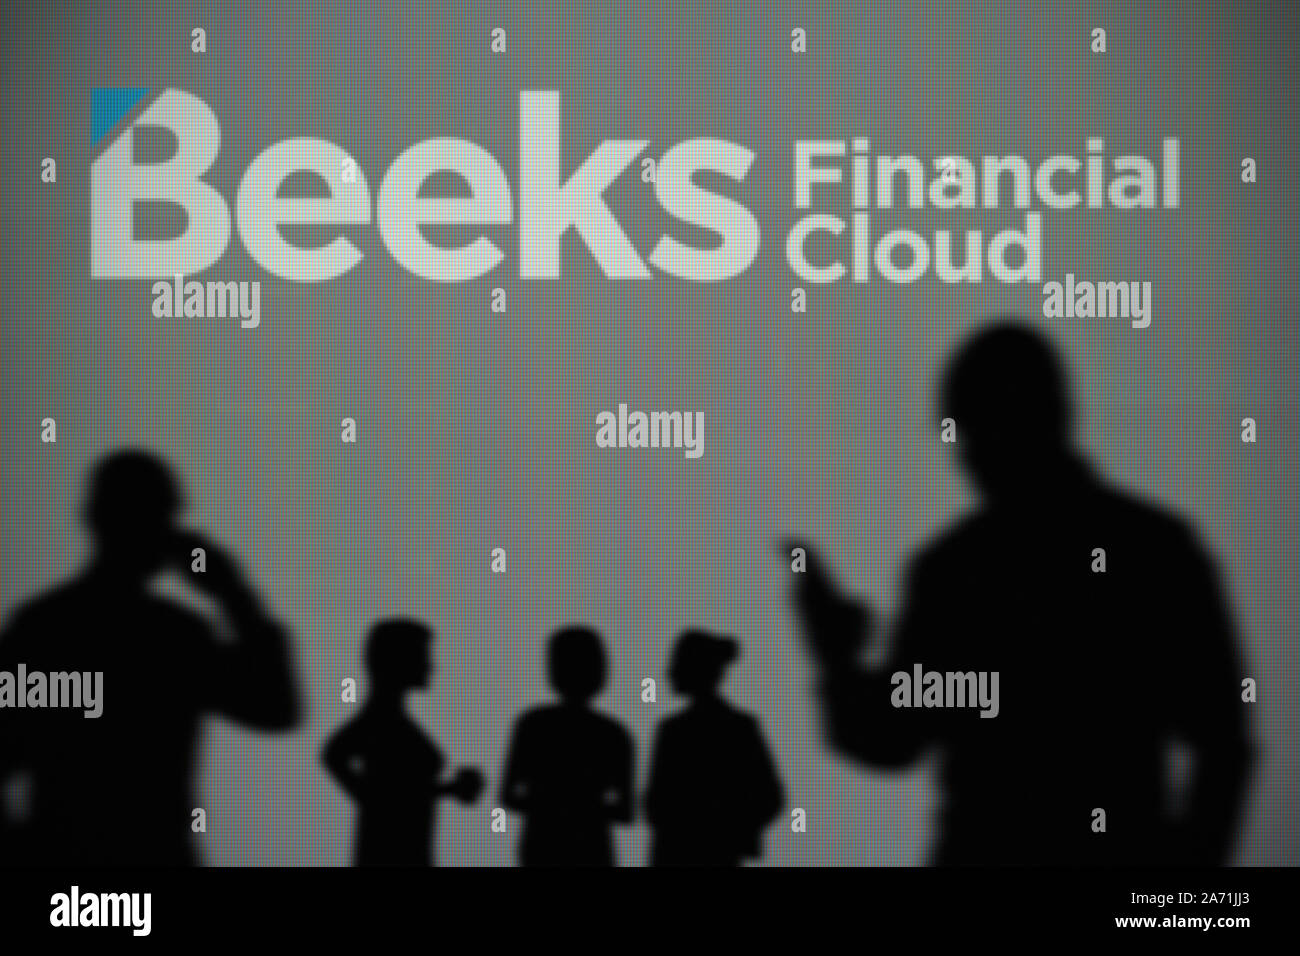 The Beeks Financial Cloud logo is seen on an LED screen in the background while a silhouetted person uses a smartphone (Editorial use only) Stock Photo